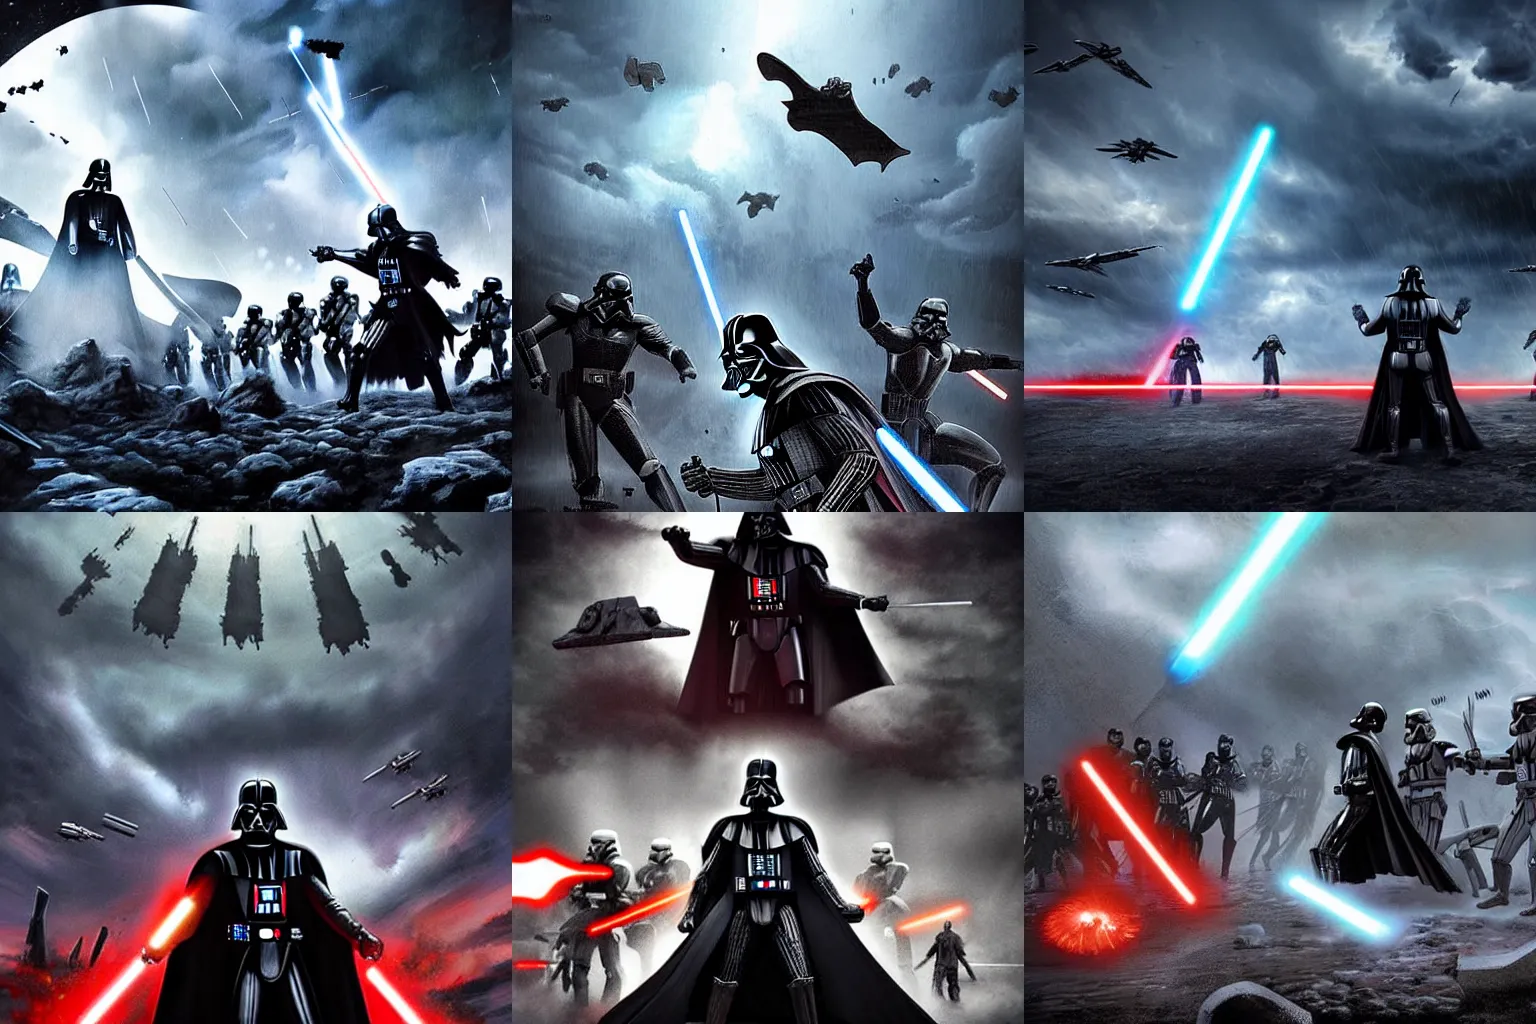 Prompt: beautiful artwork of Darth Vader fighting Thor on a post-apocalyptic planet, surrounded by Storm Troopers and the Avengers, HD, eerie